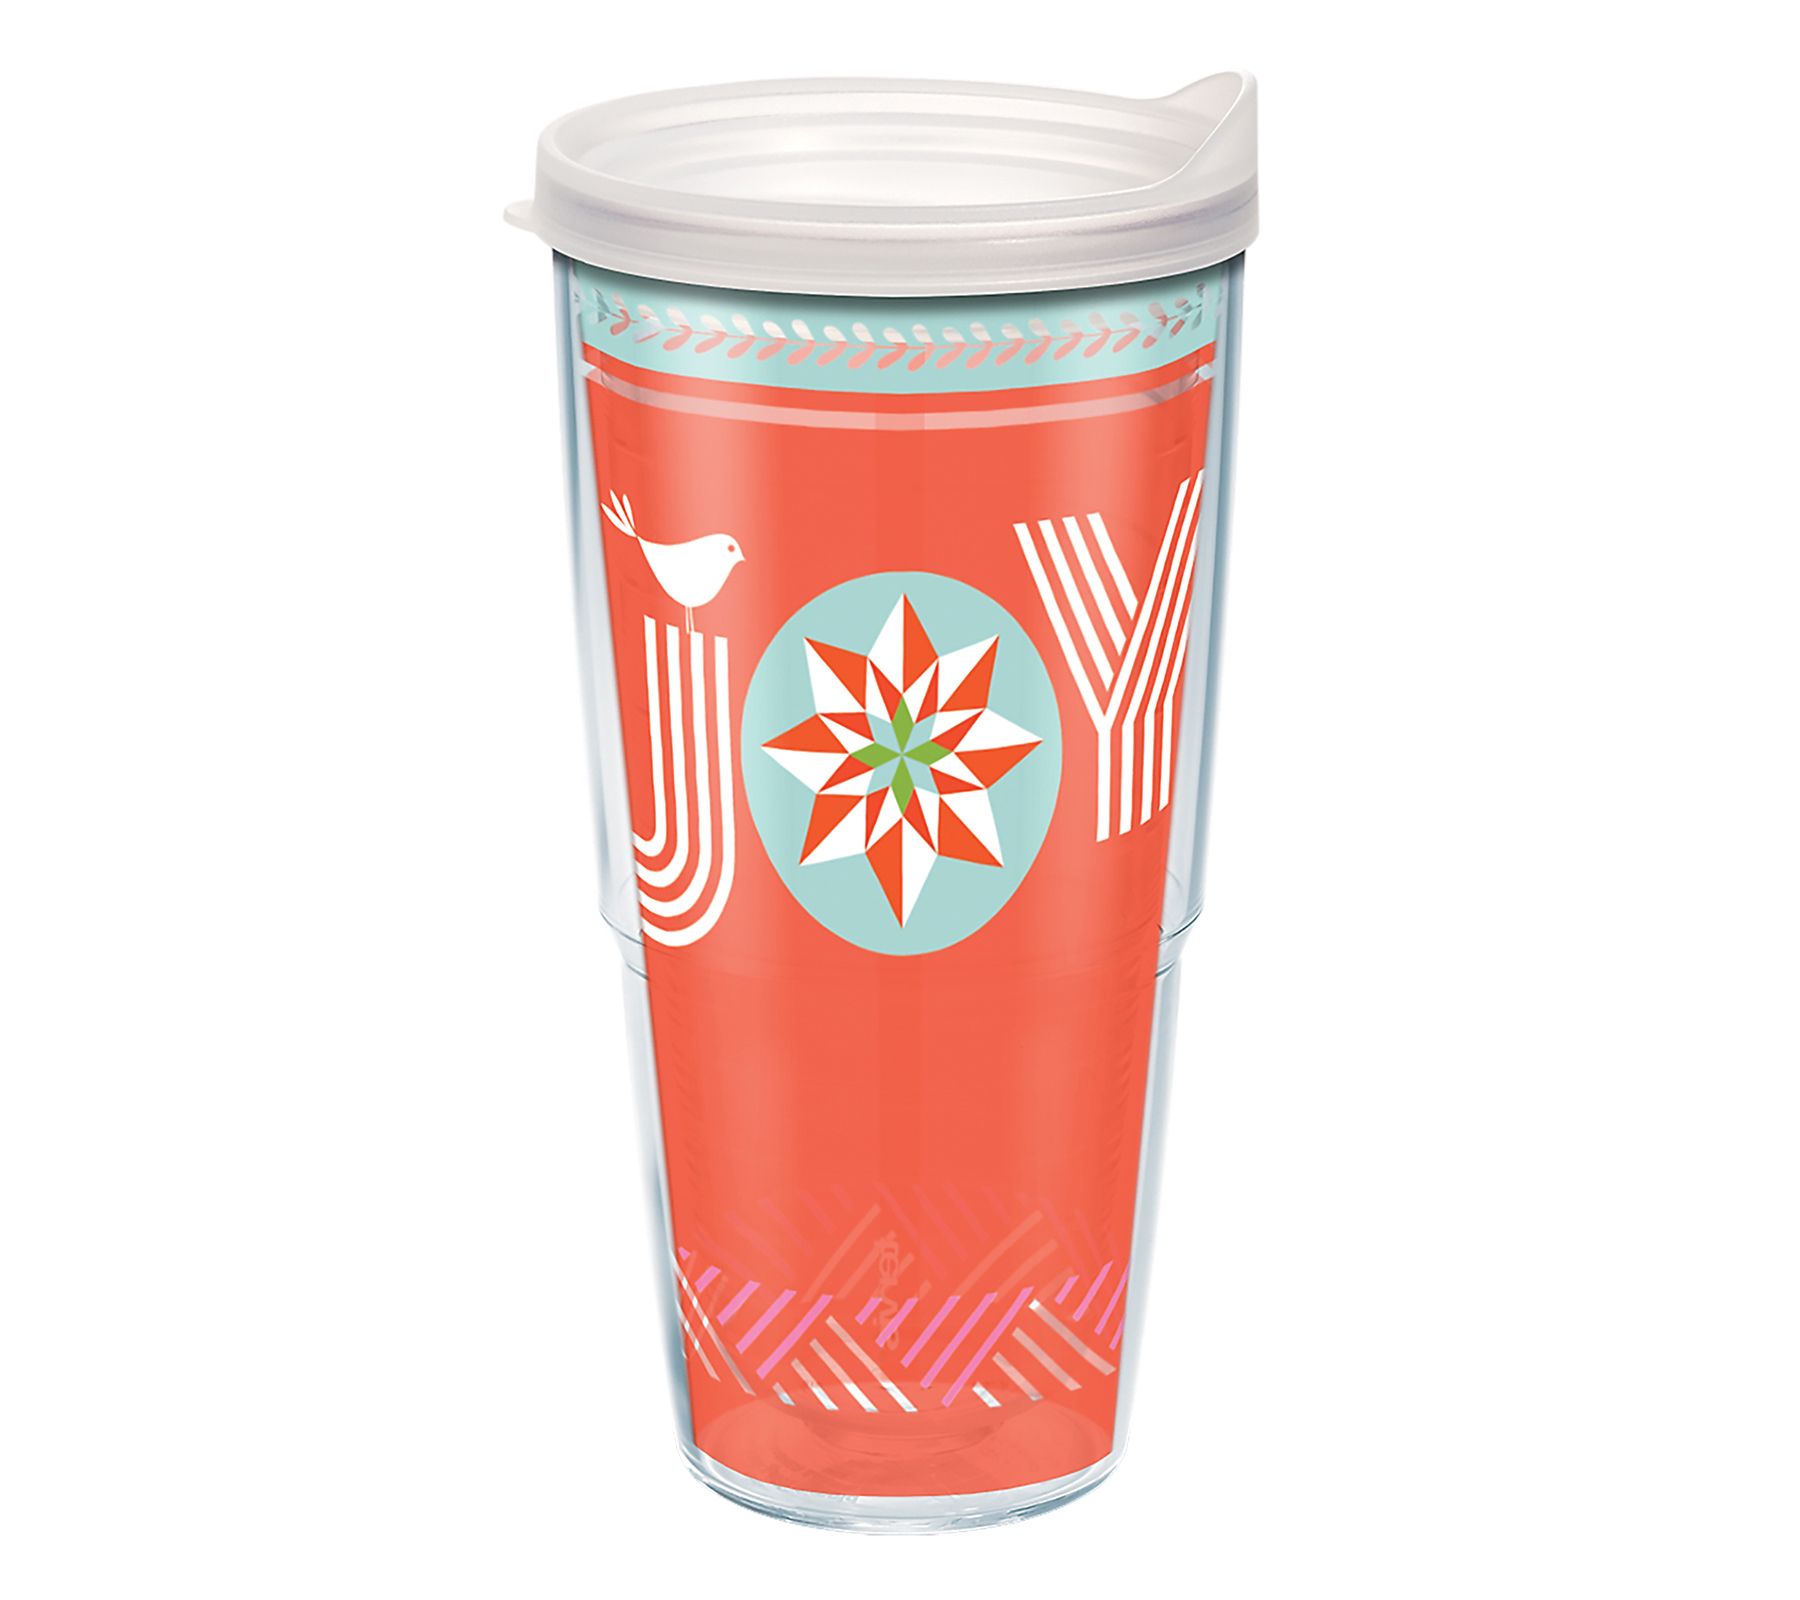 Tervis 24 oz Insulated Hot Cold Tumbler Lid & Straw Simply Southern Adoption